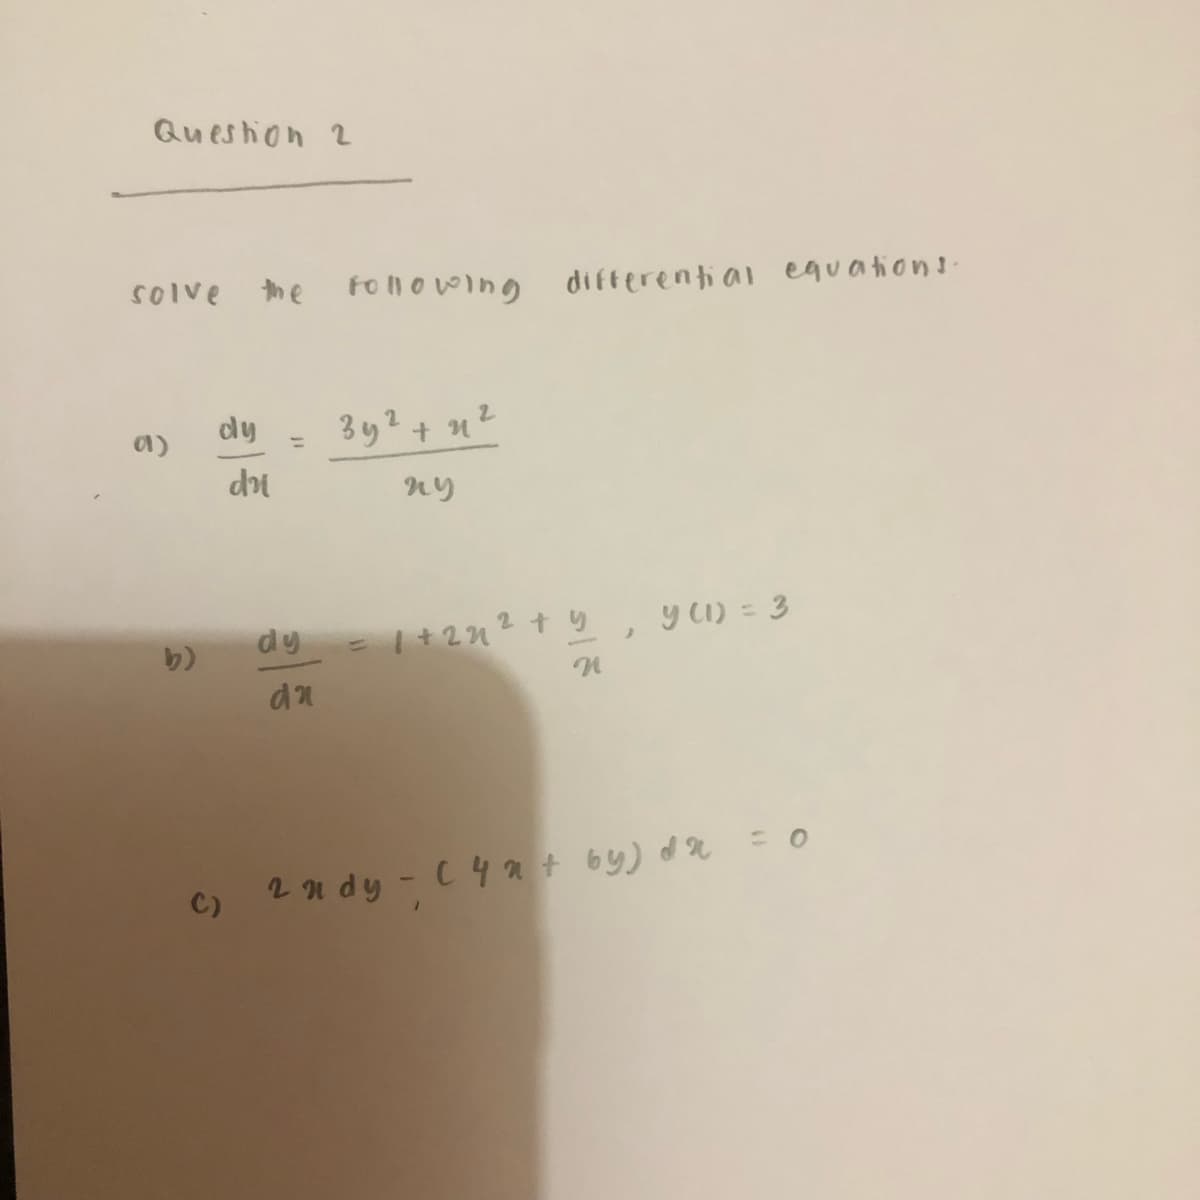 Queshon 2
SOIve
the
Foll owing differential equations-
dy
3y?+ n?
ny
dy
y 1) = 3
り)
=| +212t り,
c) 2n dy -C4Rt by) d r =0
